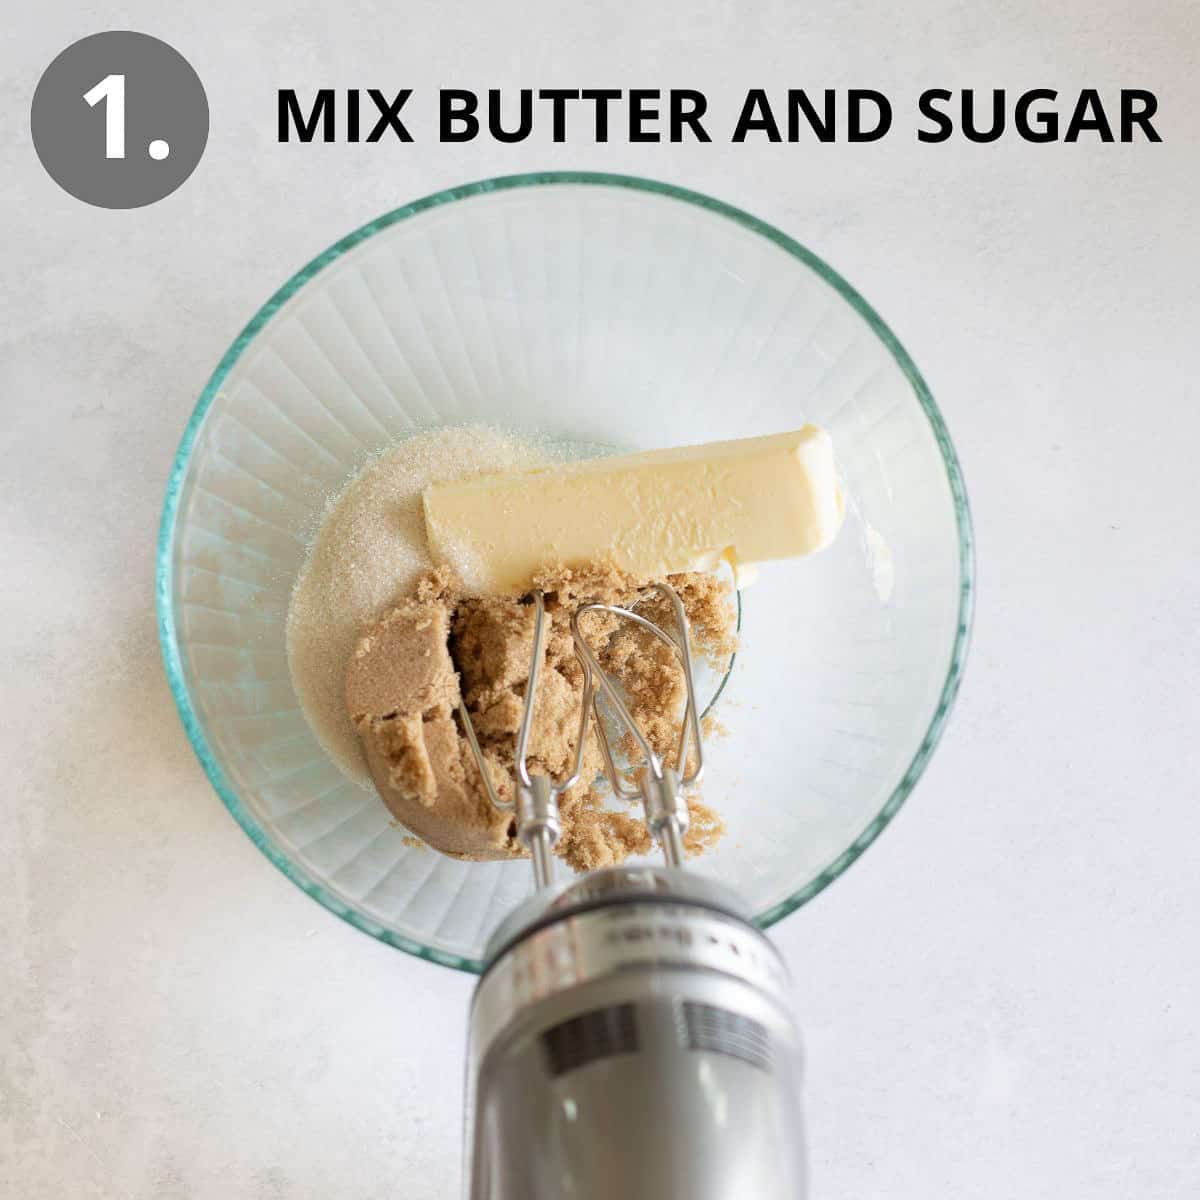 Butter and sugar in a glass bowl with a hand mixer over the top